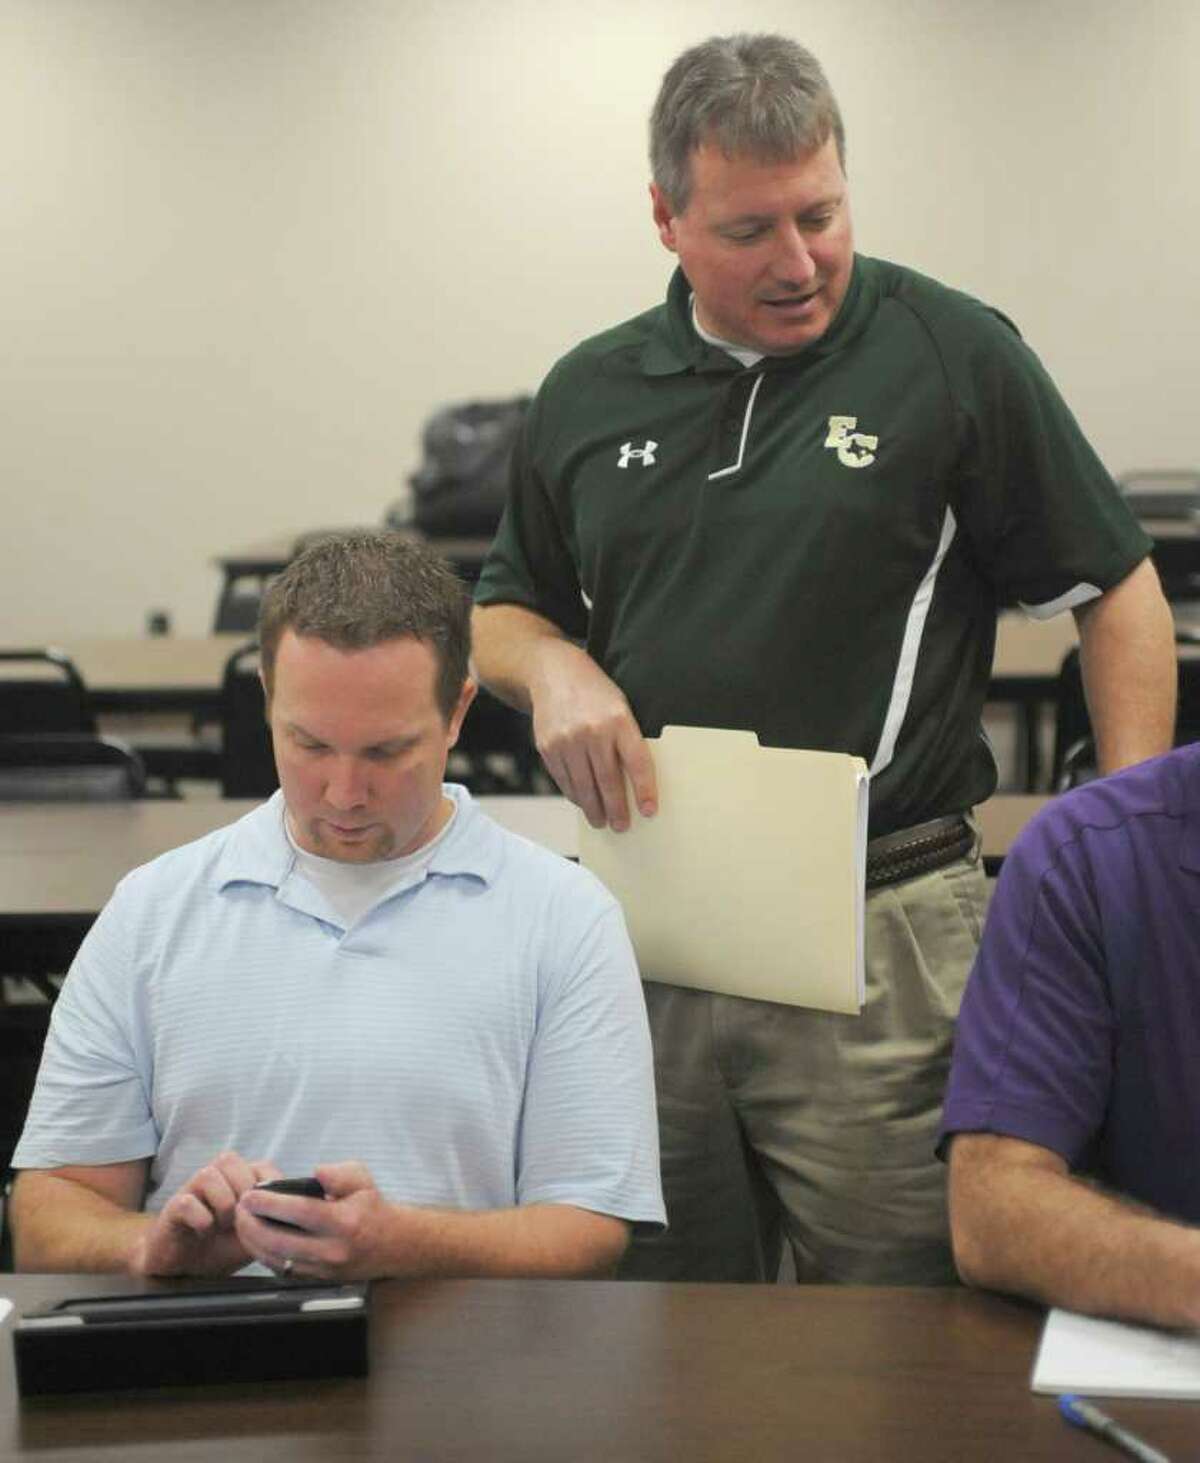 Daniel Andrews, left, with East Chambers, sends a text as Russ Sutherland, right, of East Chambers talks with others at the table. The high school sports realignment from the UIL was released at 9:00 am Thursday morning. Coaches from the area gathered at the Region 5 education service center in Beaumont for the release of the districts and to plan scheduling of games for next season. Dave Ryan/The Enterprise